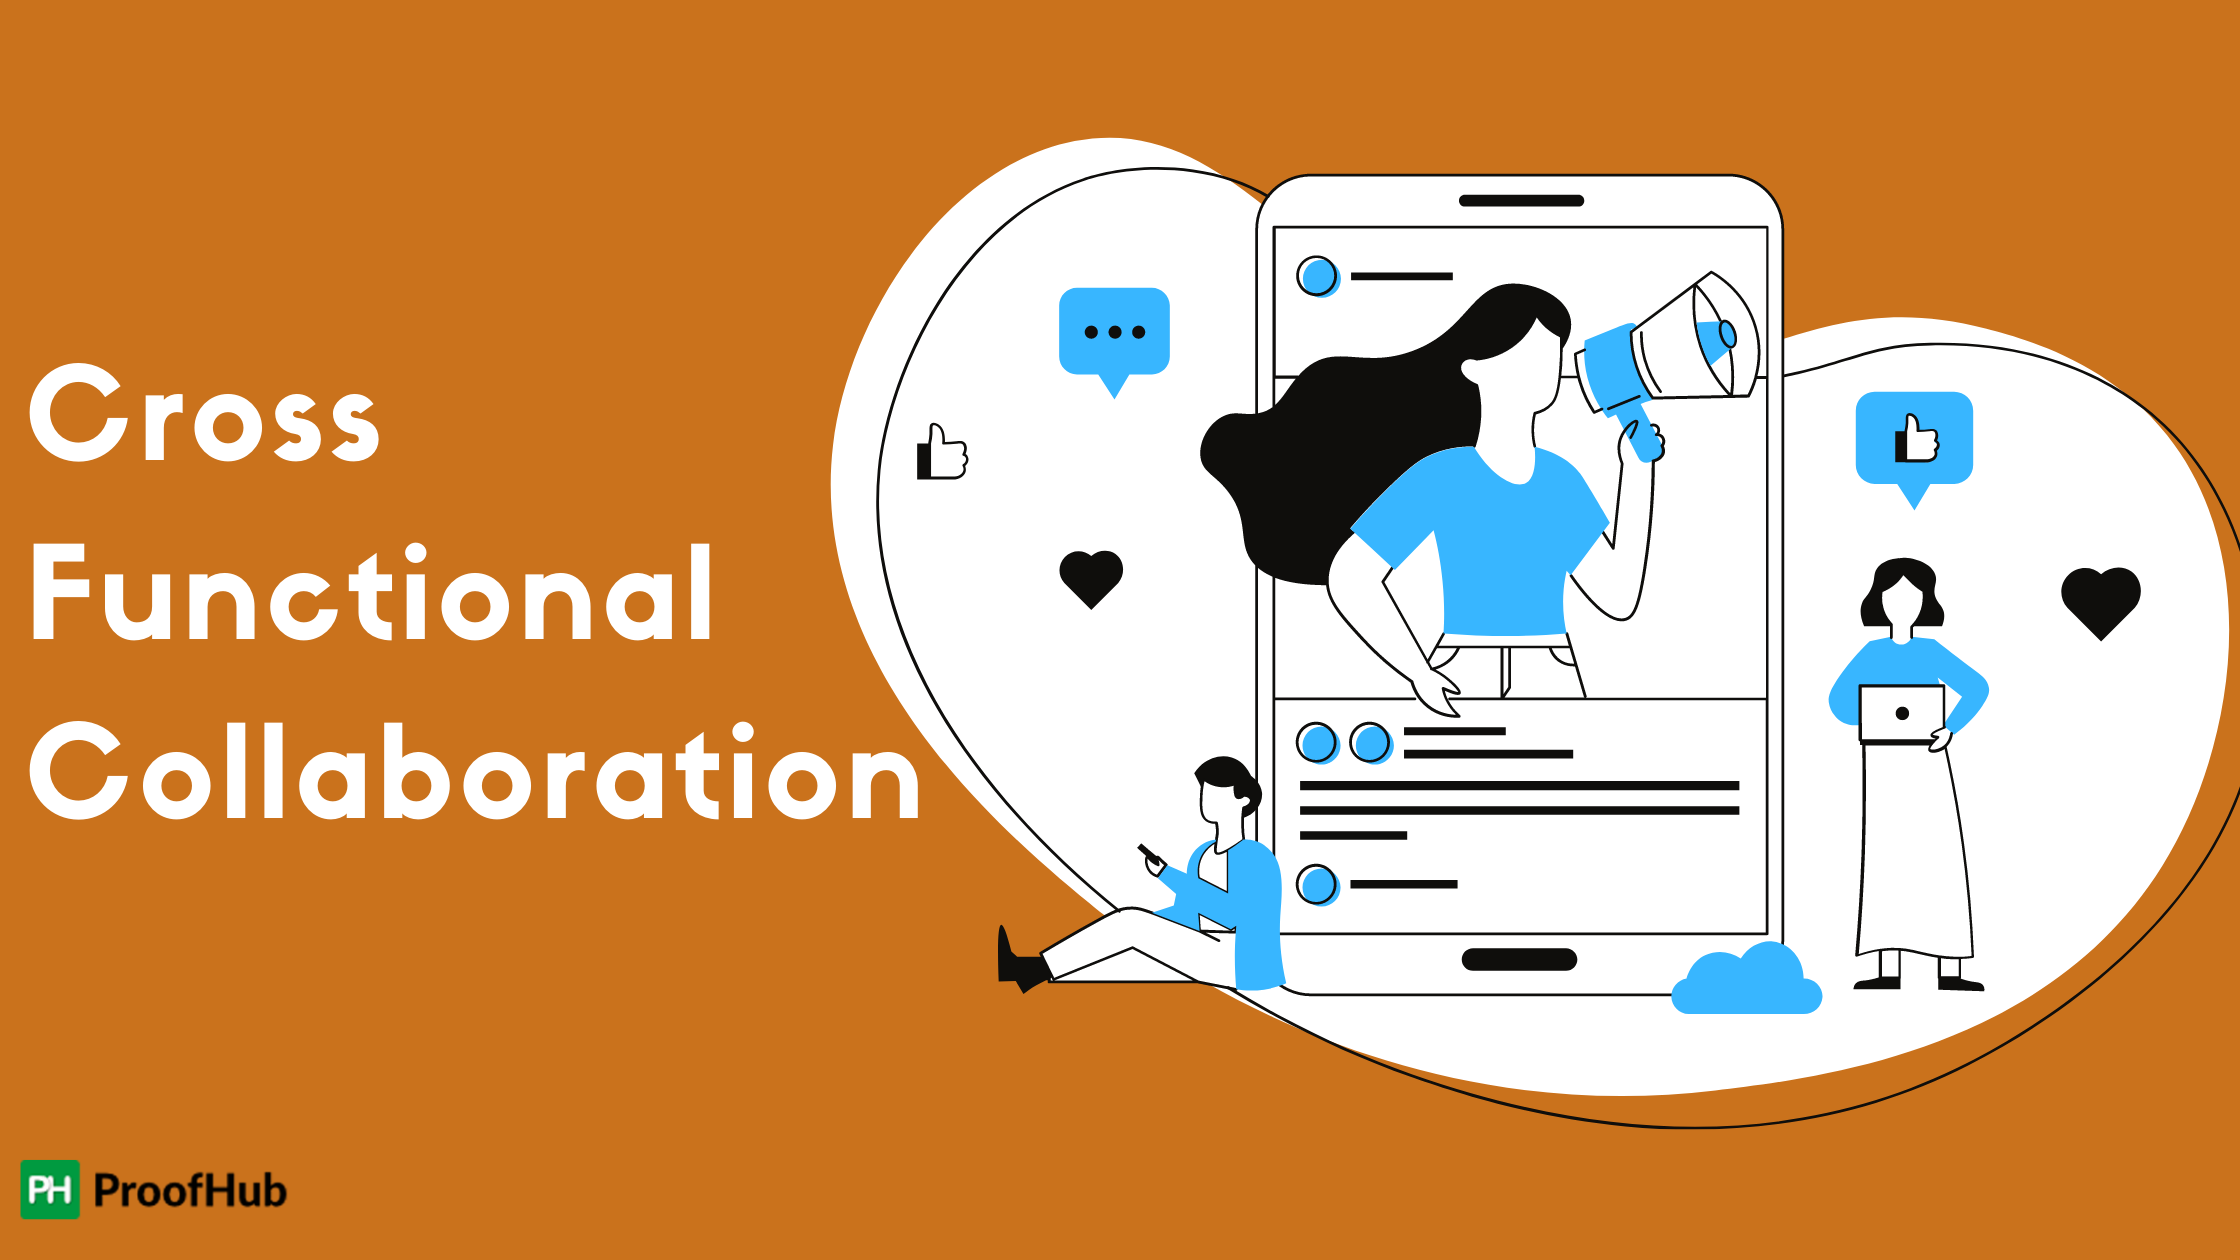 Cross Functional Collaboration: Does Your Organization Need It?